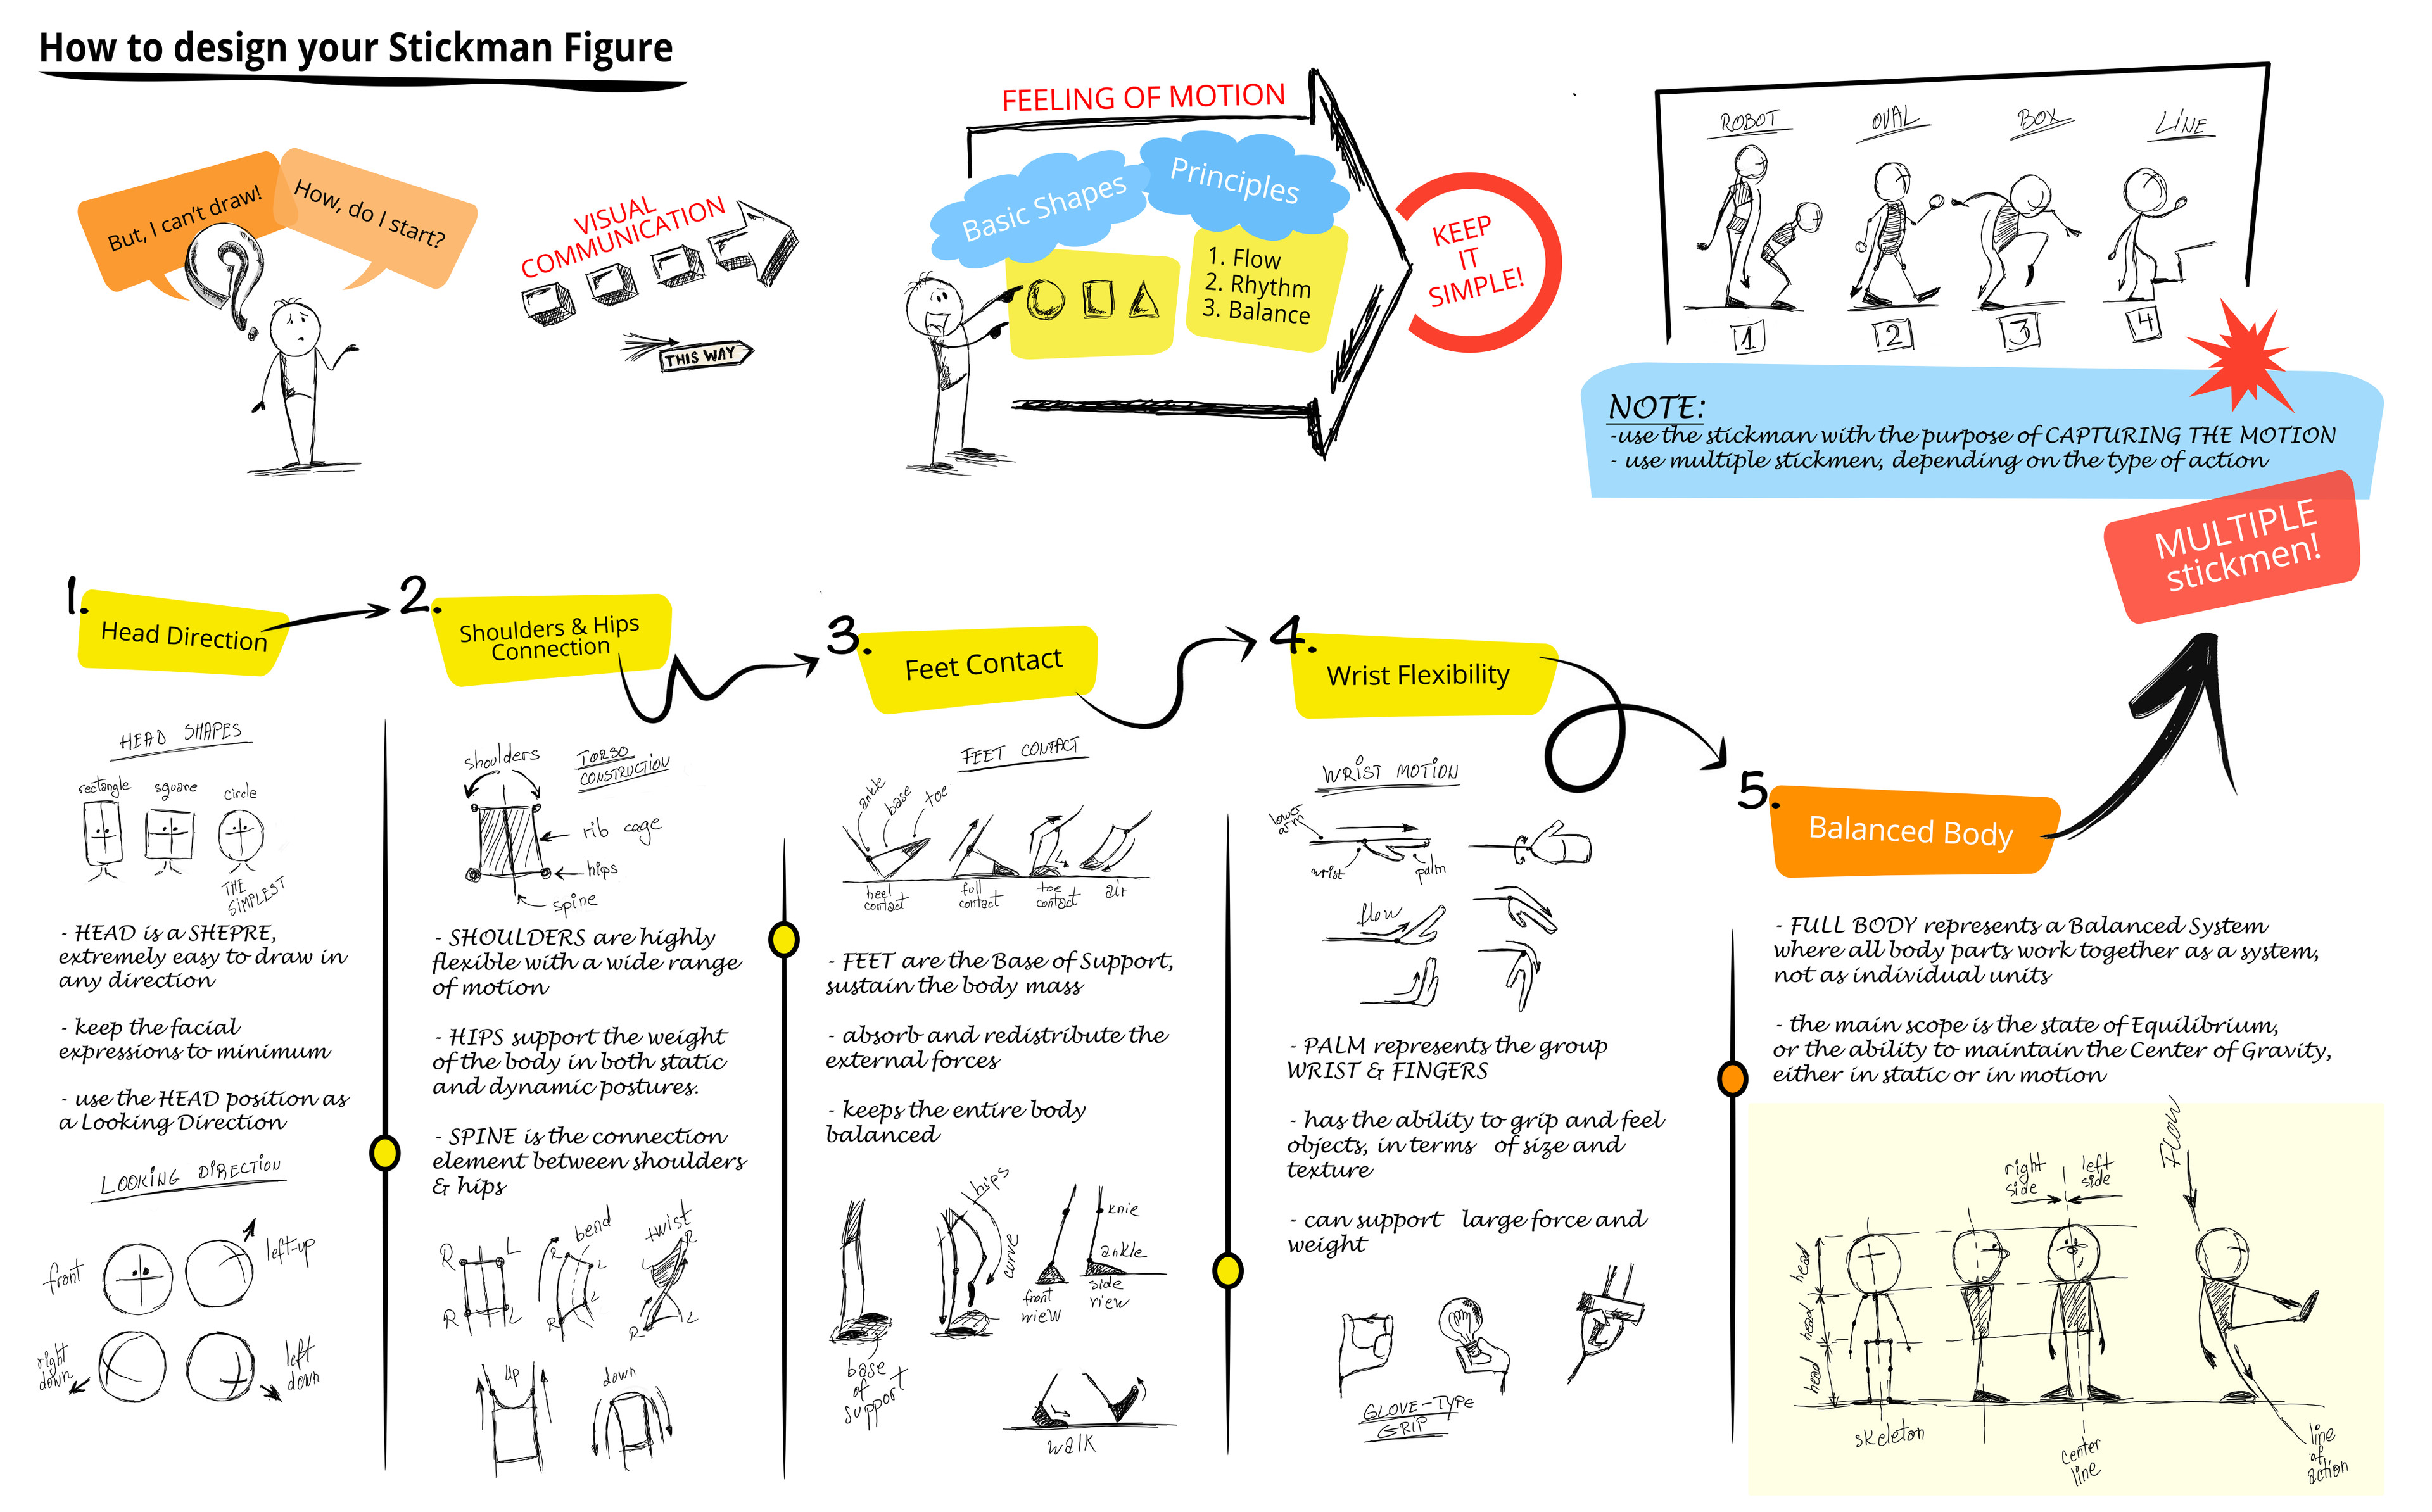 Designing a successful stickman. The purpose of mastering a stickman figure drawing is to capture the “motion”. If you're able to sketch a complex motion by using a simplified way of visualization, such as a stickman … you rock!